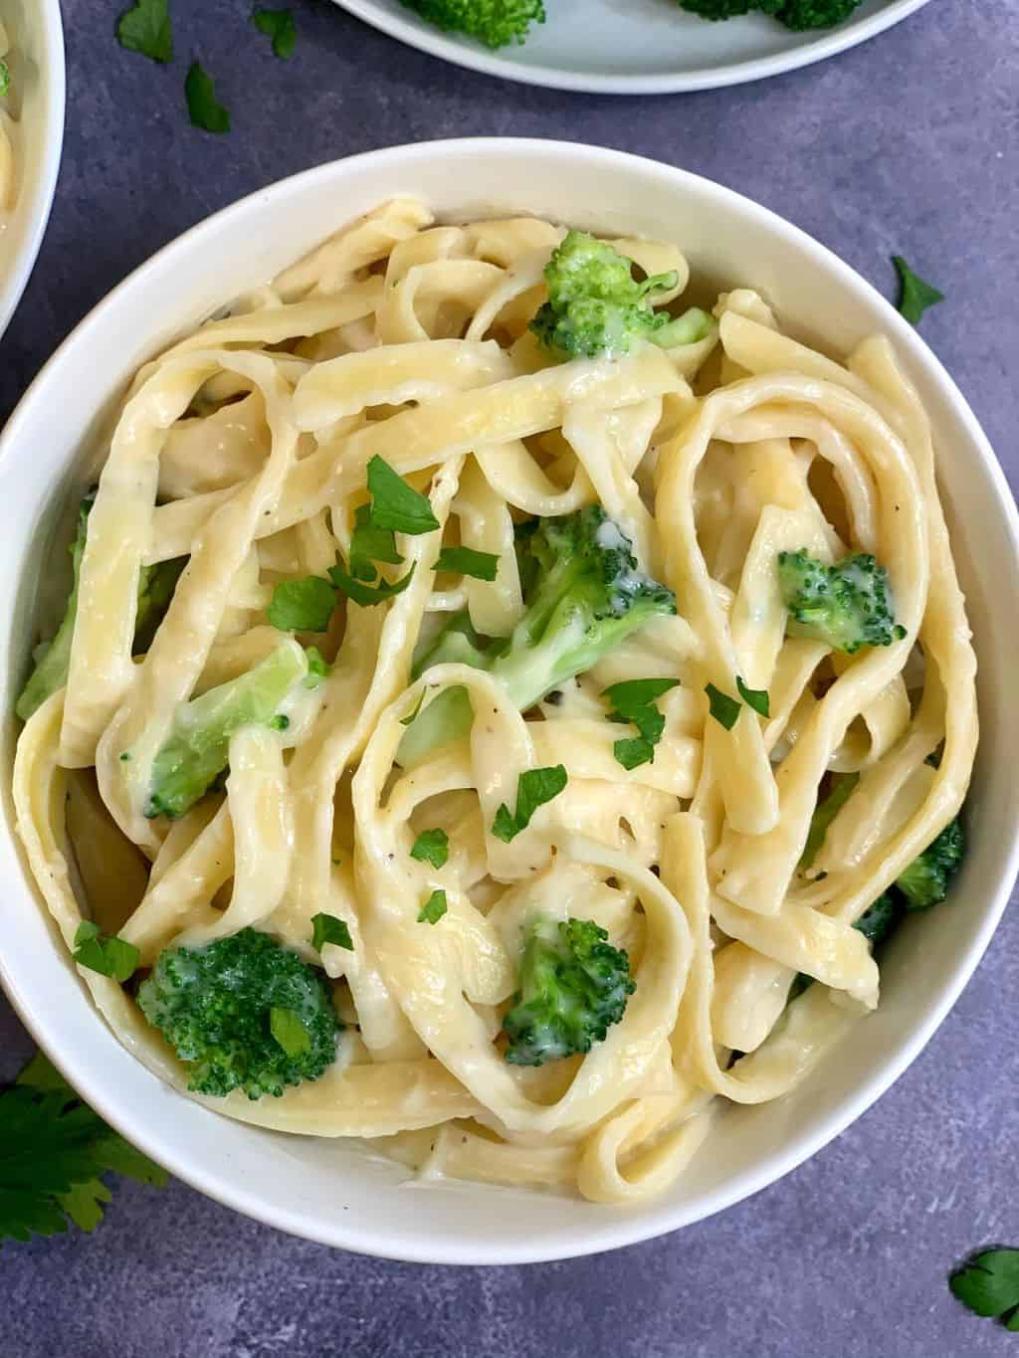 What Are the Best Restaurants to Get Fettuccine?